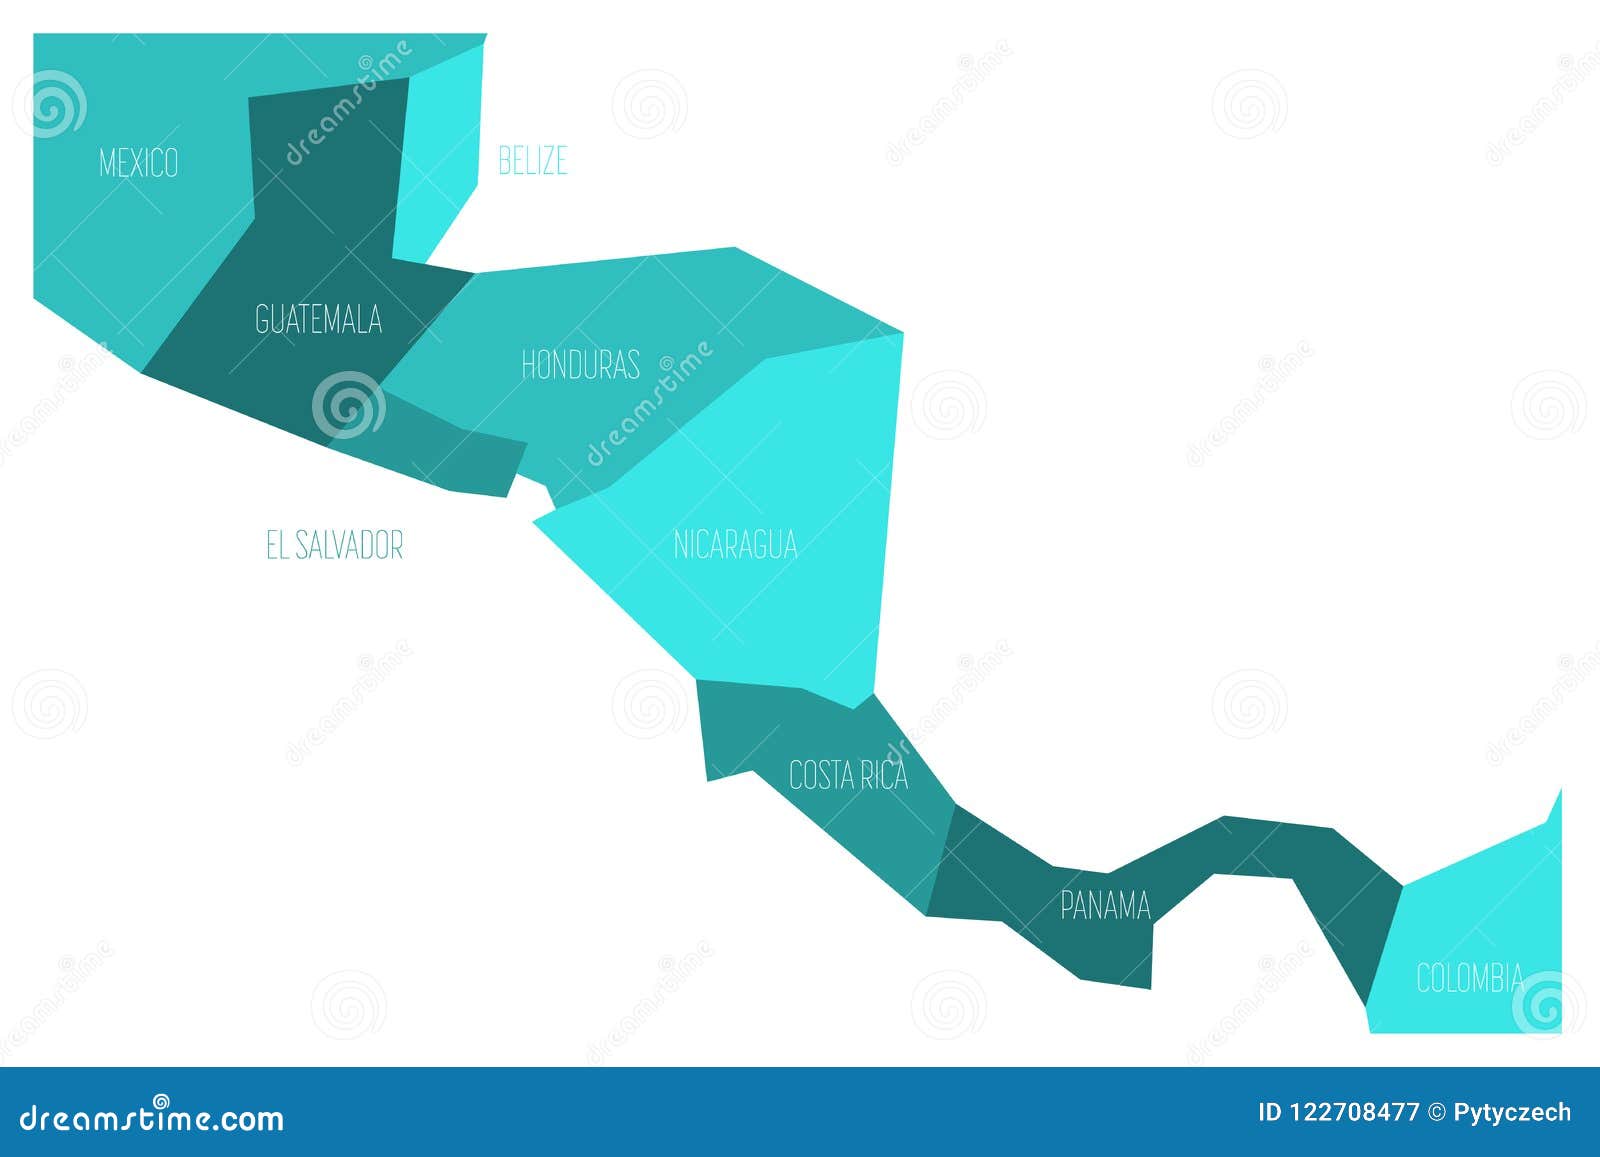 political map of central amercia. simlified schematic flat  map in shades of turquoise blue